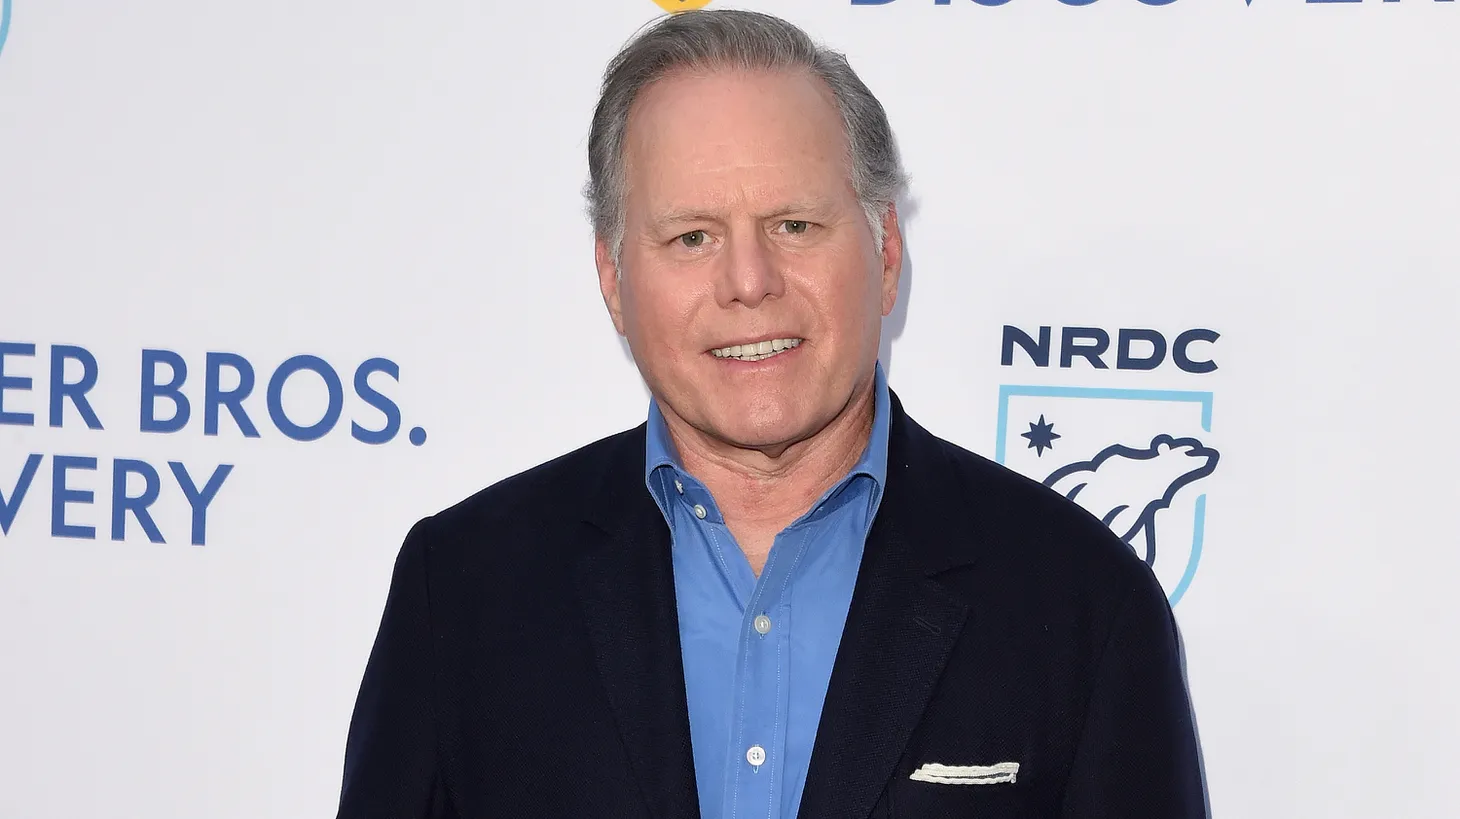 “David Zaslav has a big amount of cutting he has to do, and he is making it clear that the ax will swing,” says Kim Masters. Zaslav attends the NRDC night of Comedy at Neuehouse Hollywood in Los Angeles, on June 7, 2022.